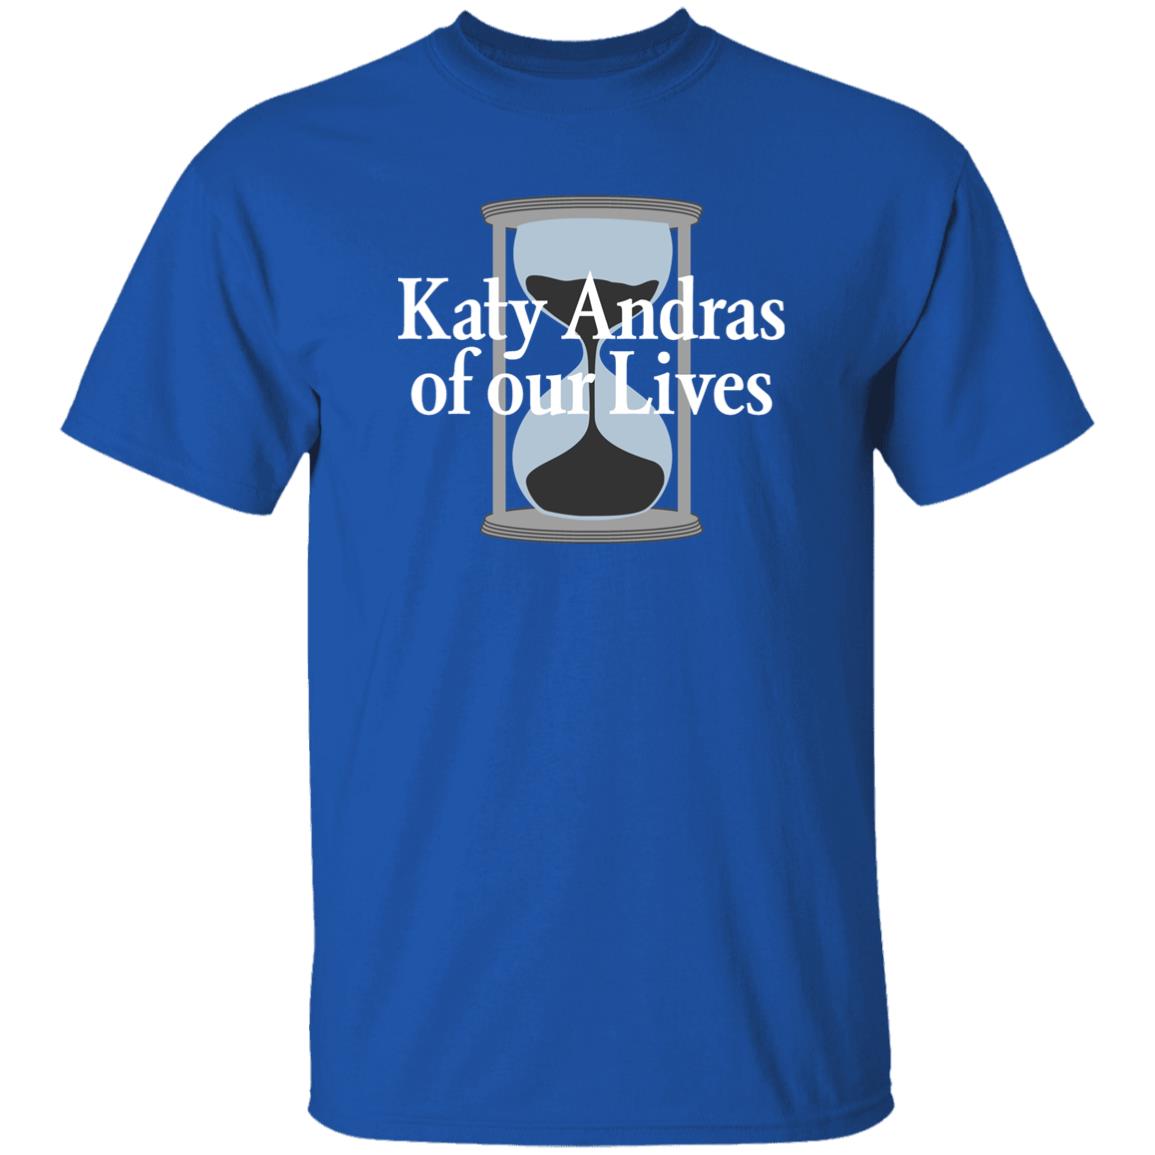 Monica Bo to Hope Katy Andras Of Our Lives Shirt